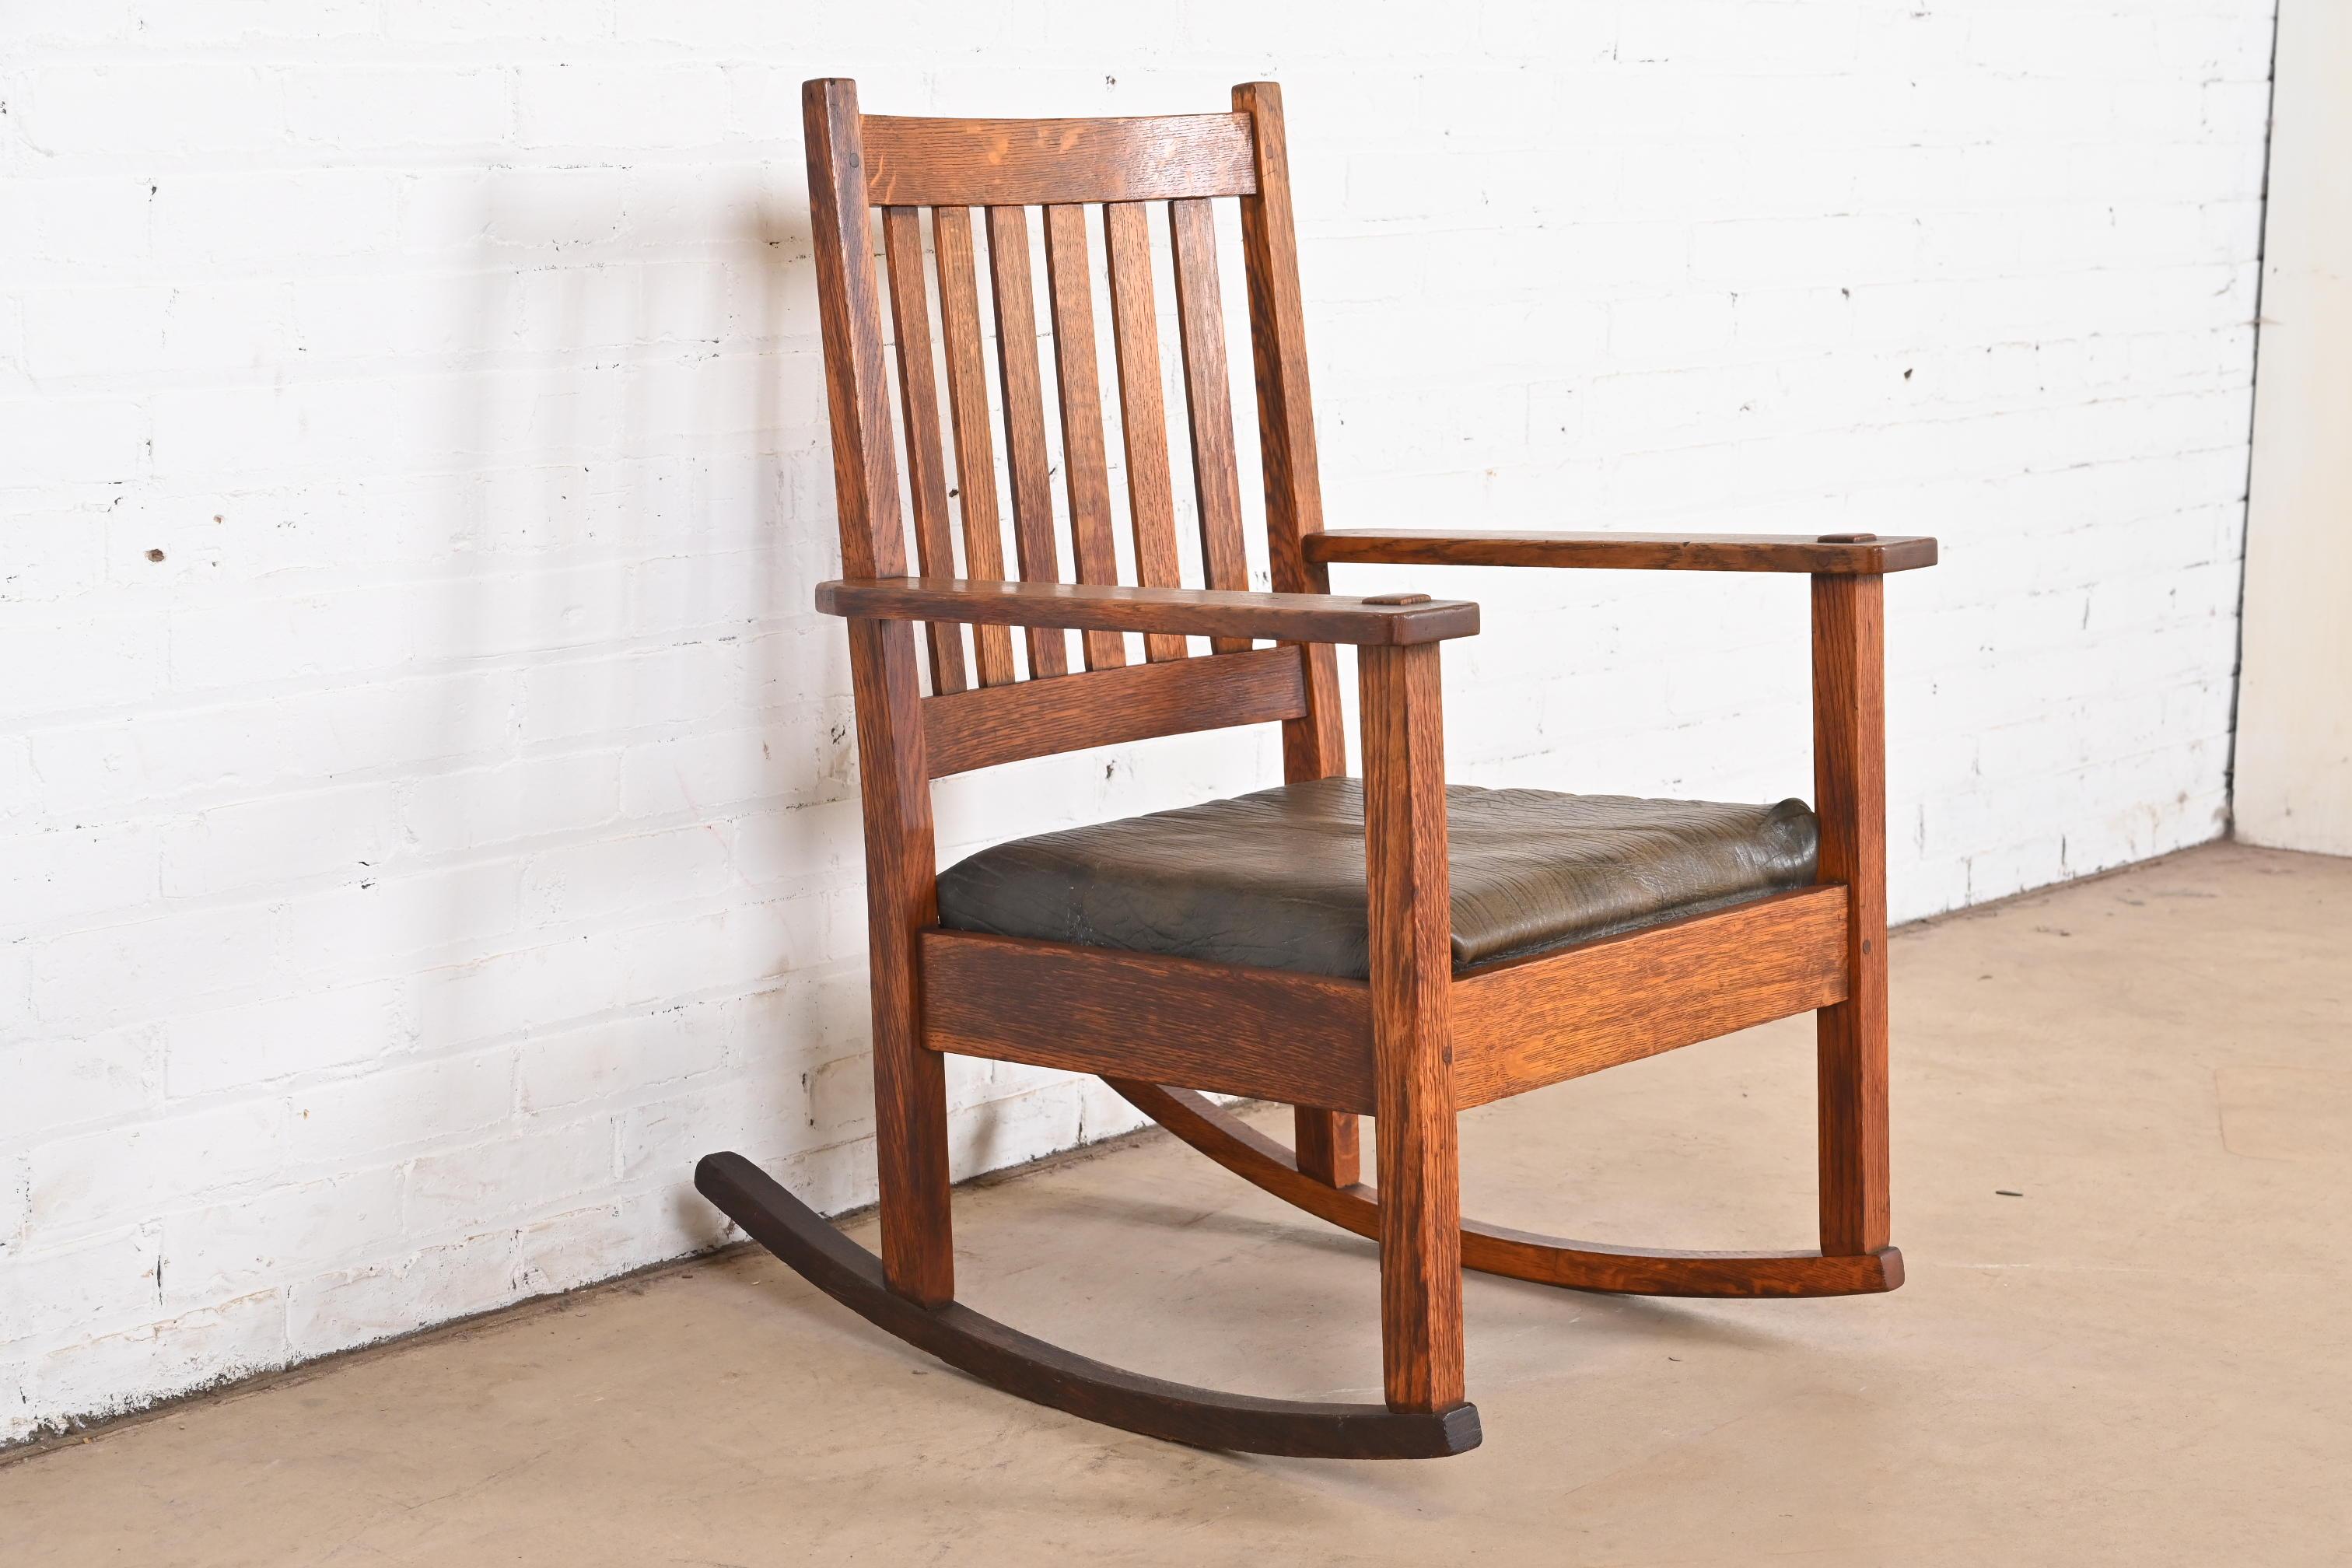 American Stickley Brothers Antique Mission Oak Arts & Crafts Rocking Chair, Circa 1900 For Sale